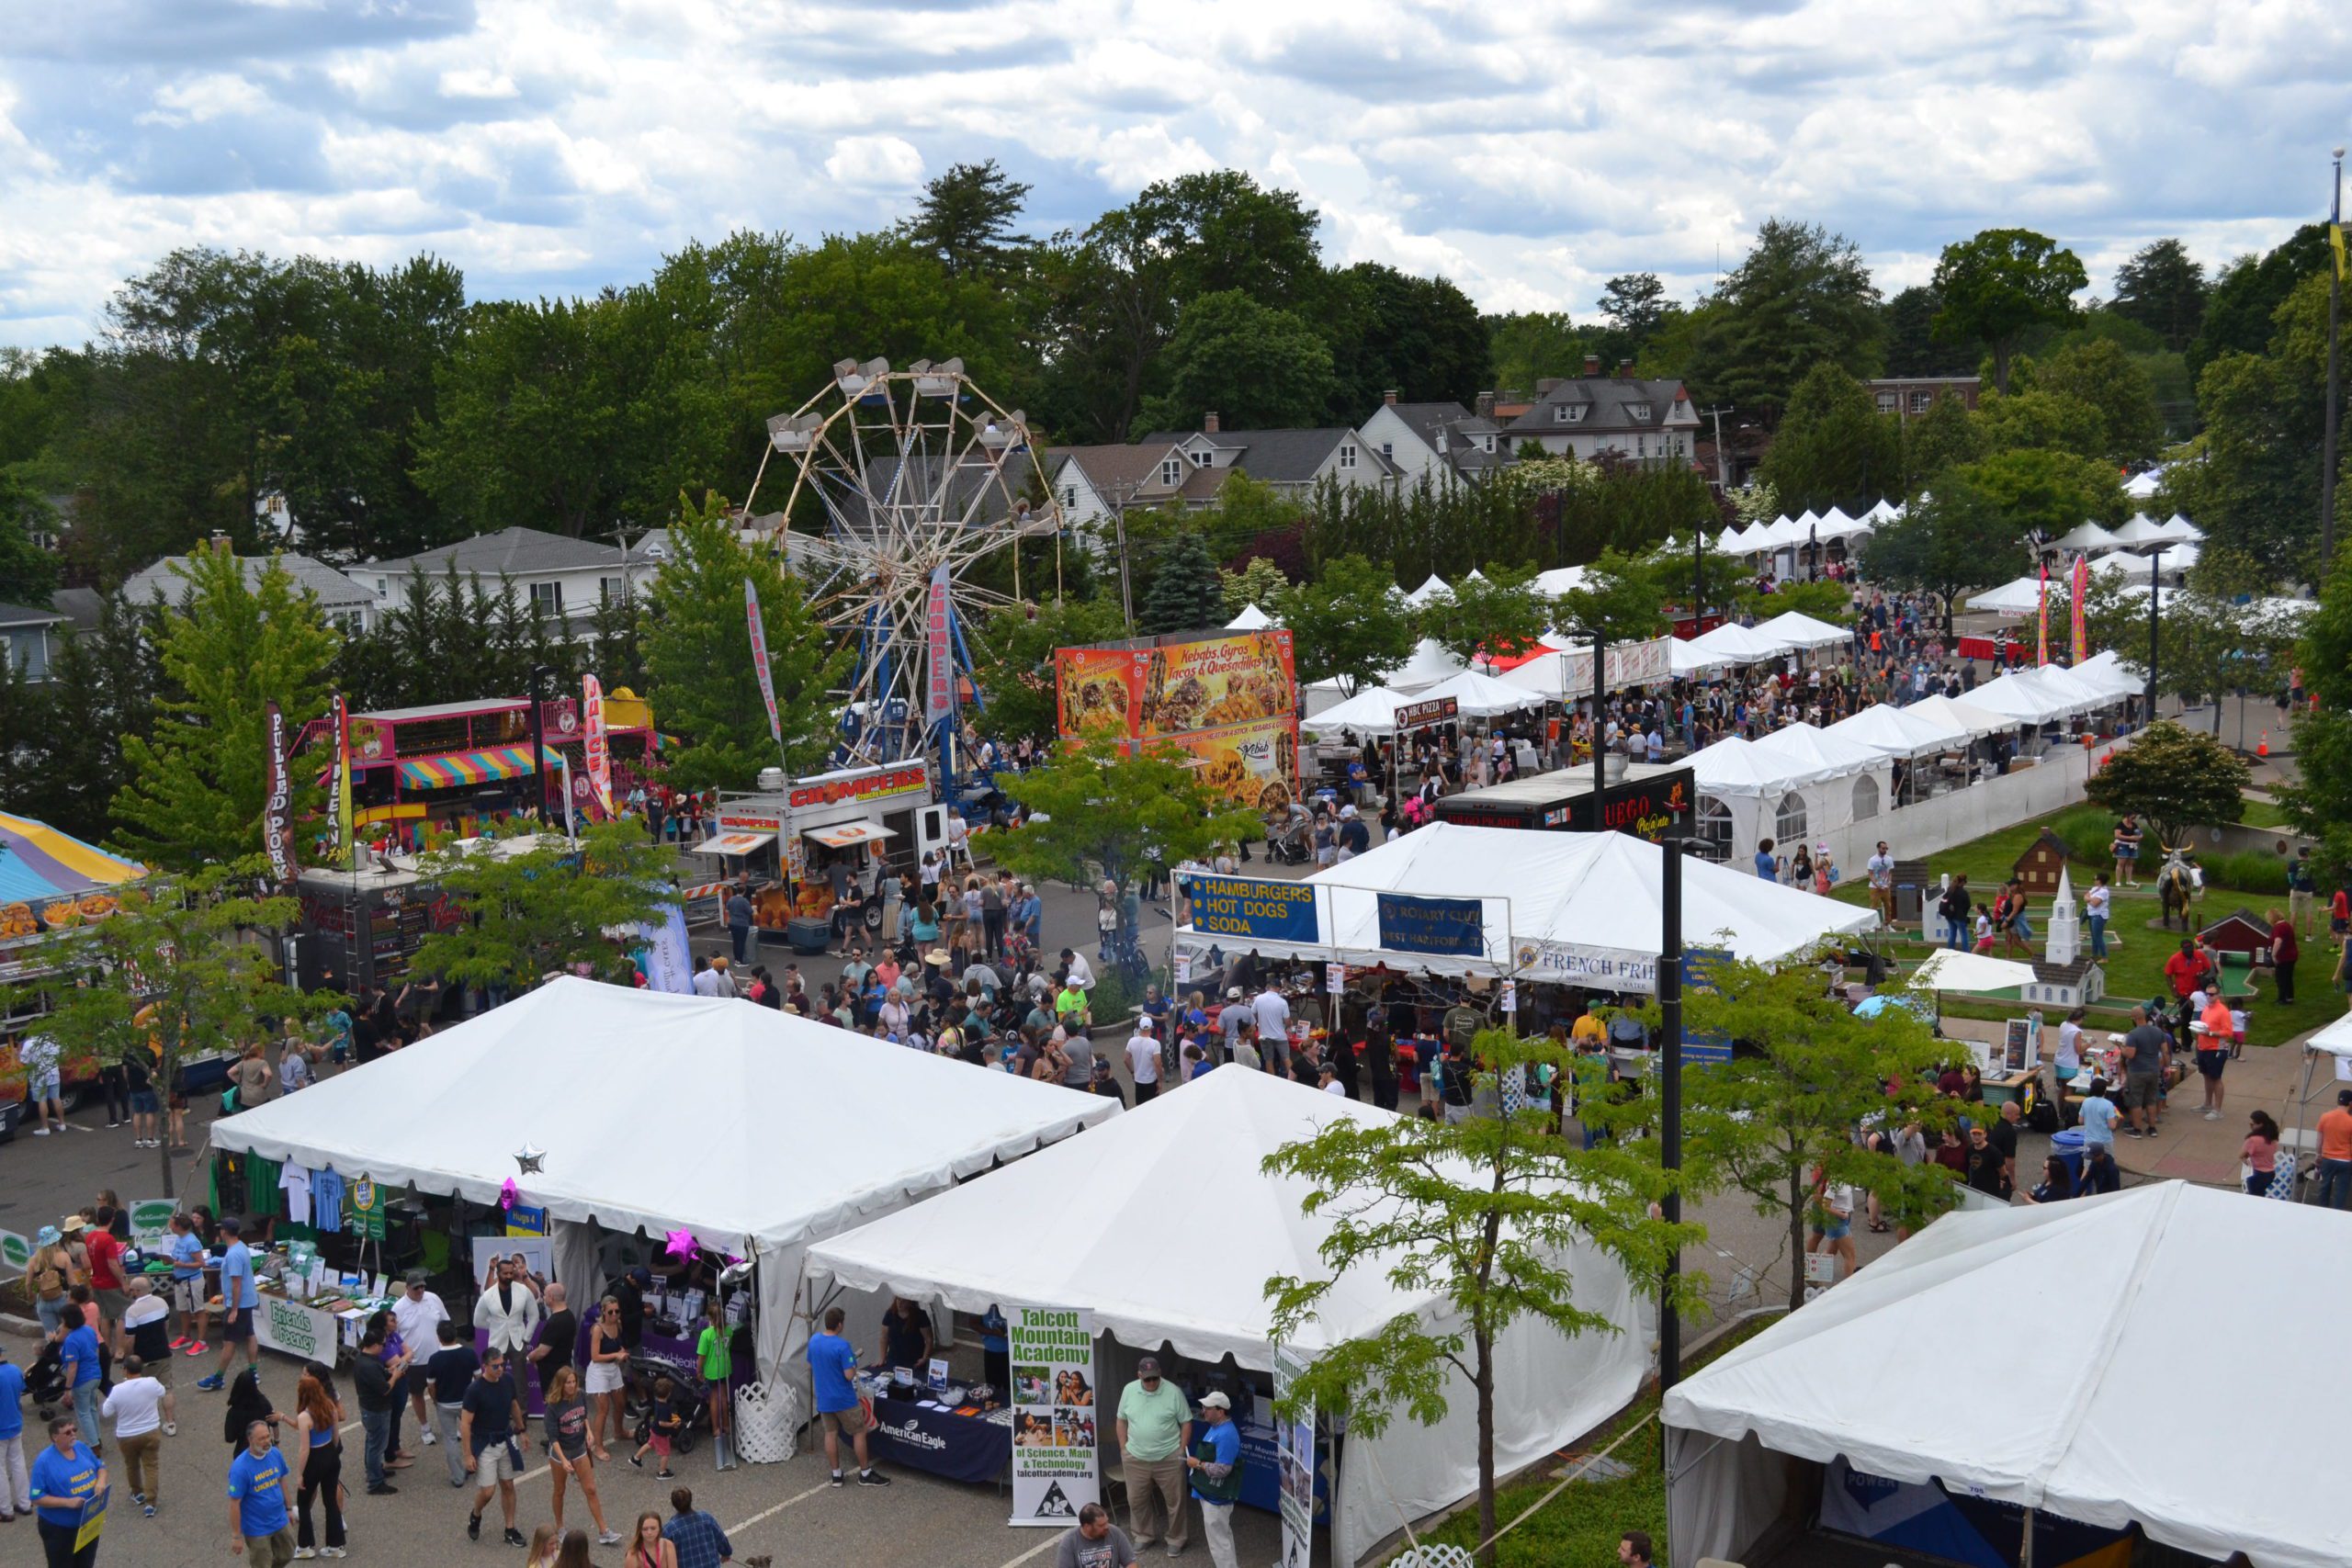 Celebrate! West Hartford returns this weekend; here's what to know